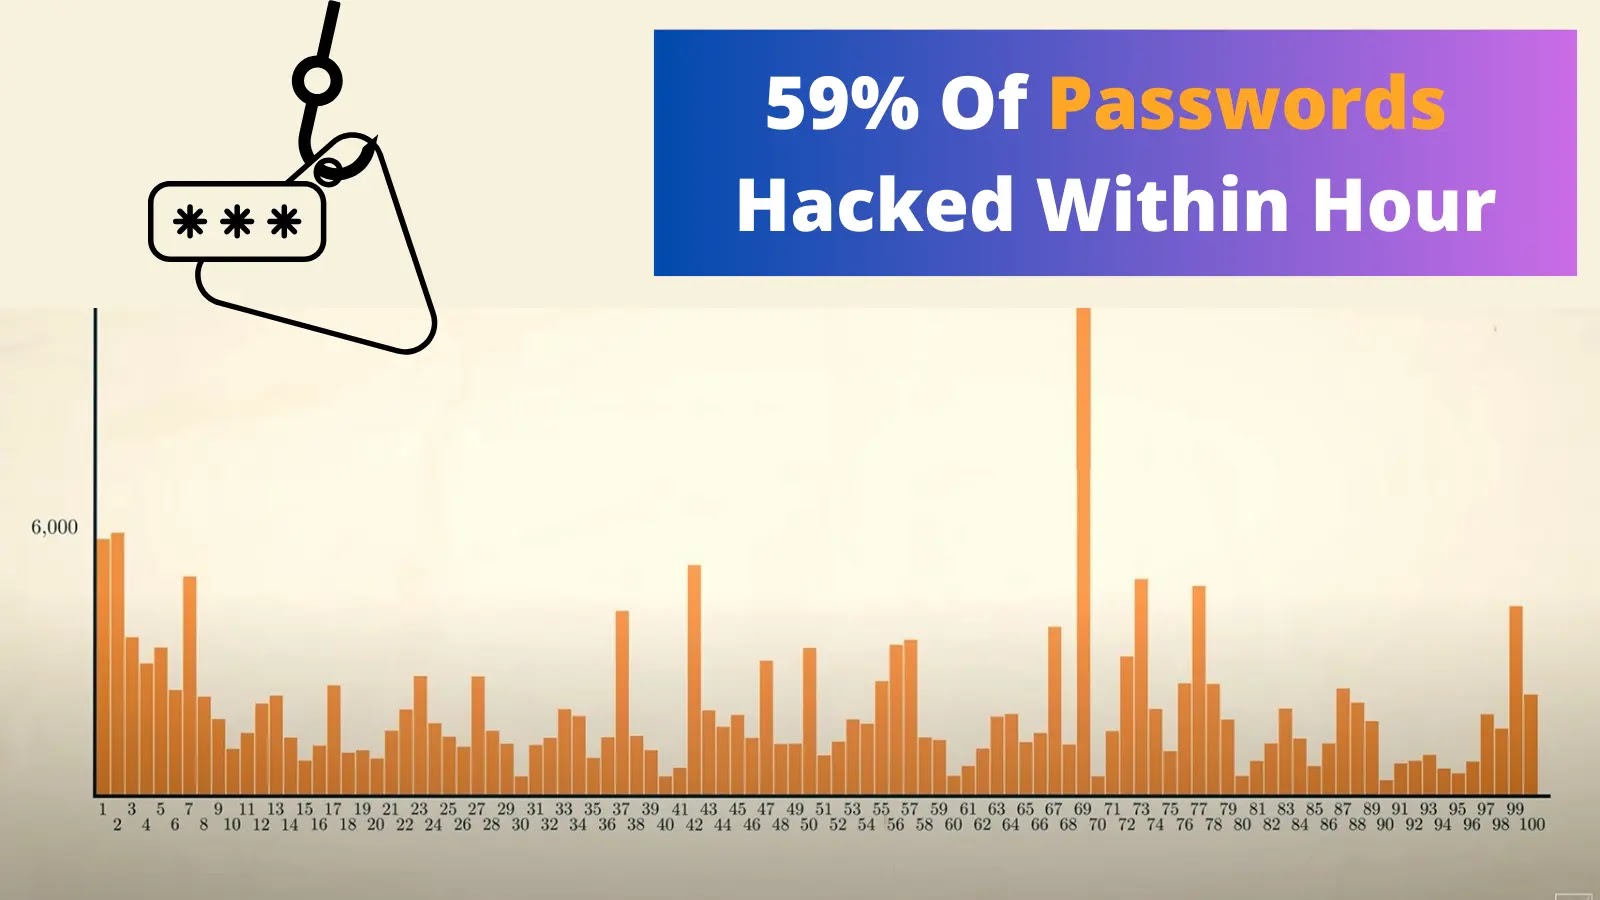 Hackers Can Crack Down 59% Of Passwords Within A Hour